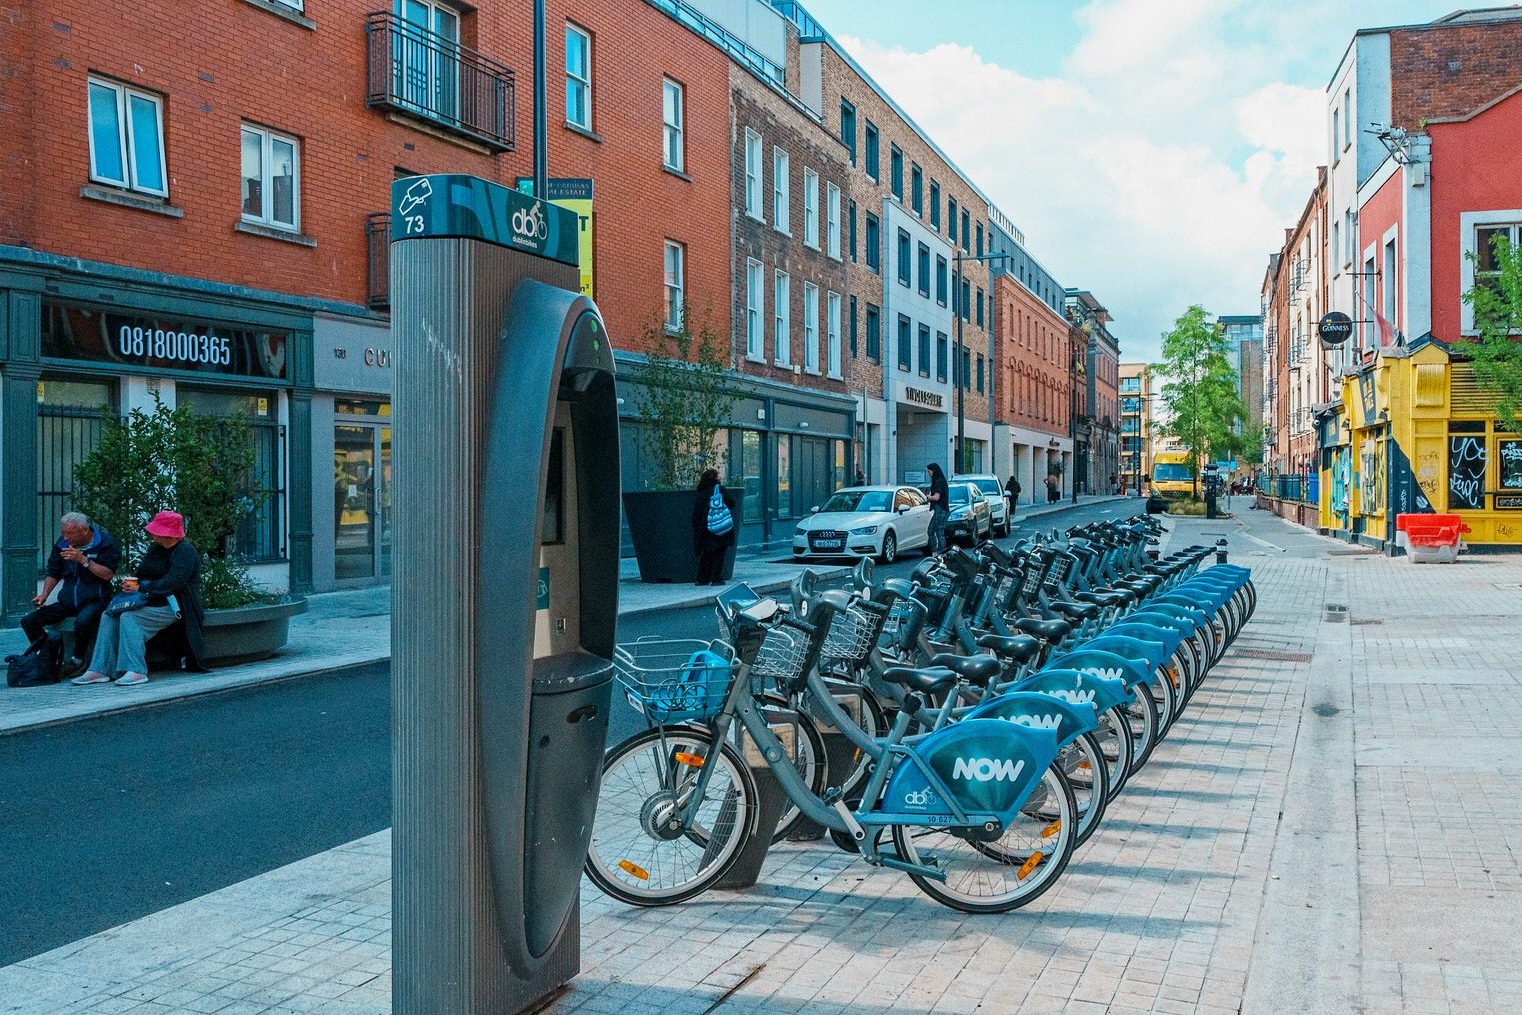 DUBLINBIKES DOCKING STATION 73 [AT THE OLD IVEAGH MARKETS BUILDING ON FRANCIS STREET] 002